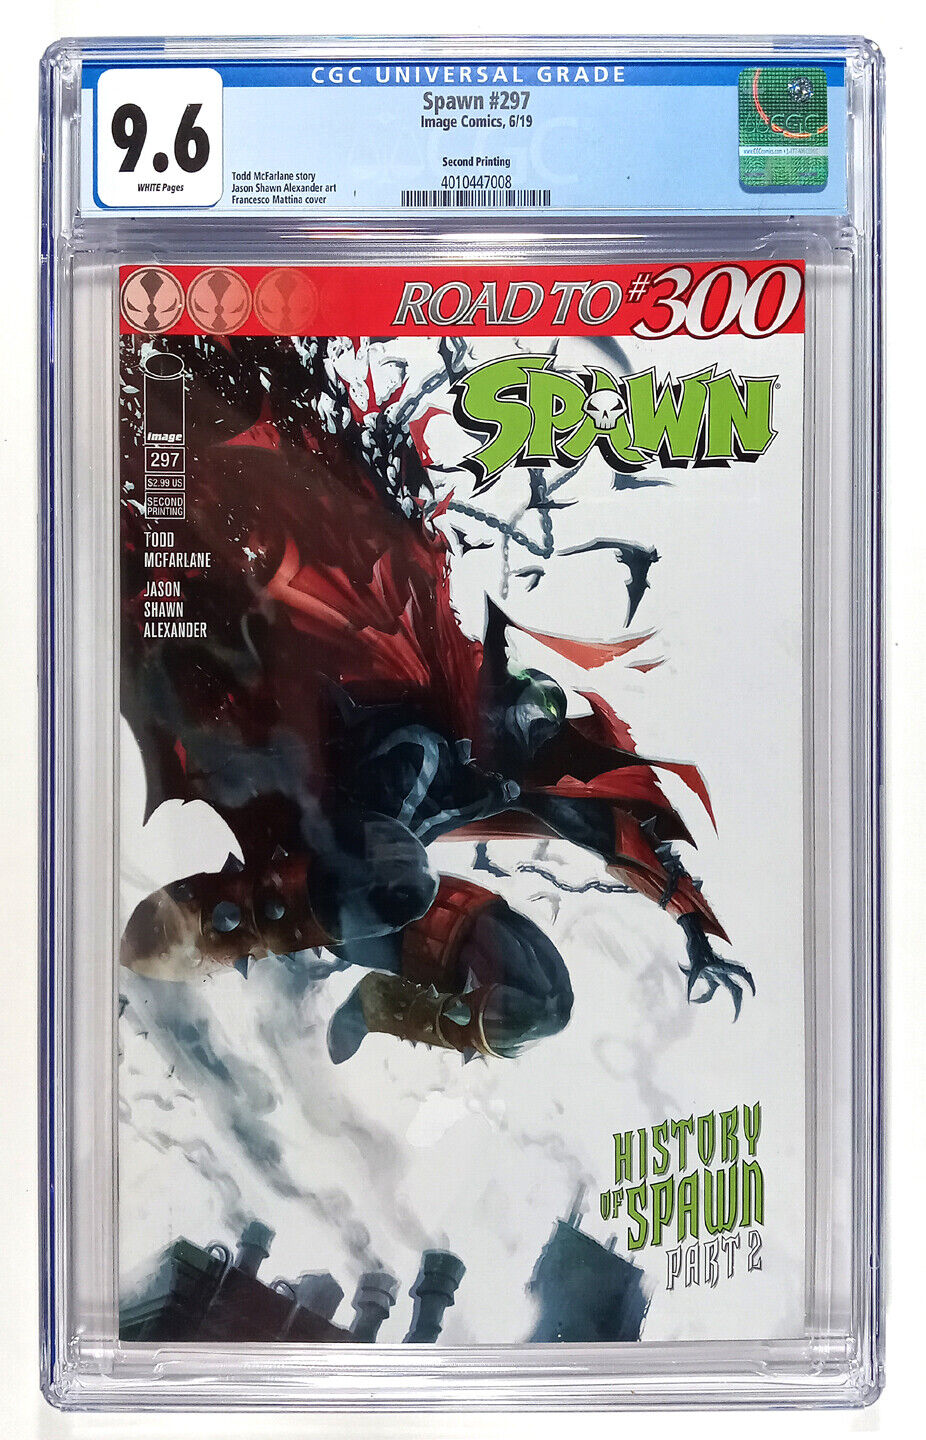 Spawn #297  KEY 9.6 CGC White Pgs. 2nd Prt.History of Spawn  (2019) Image  New